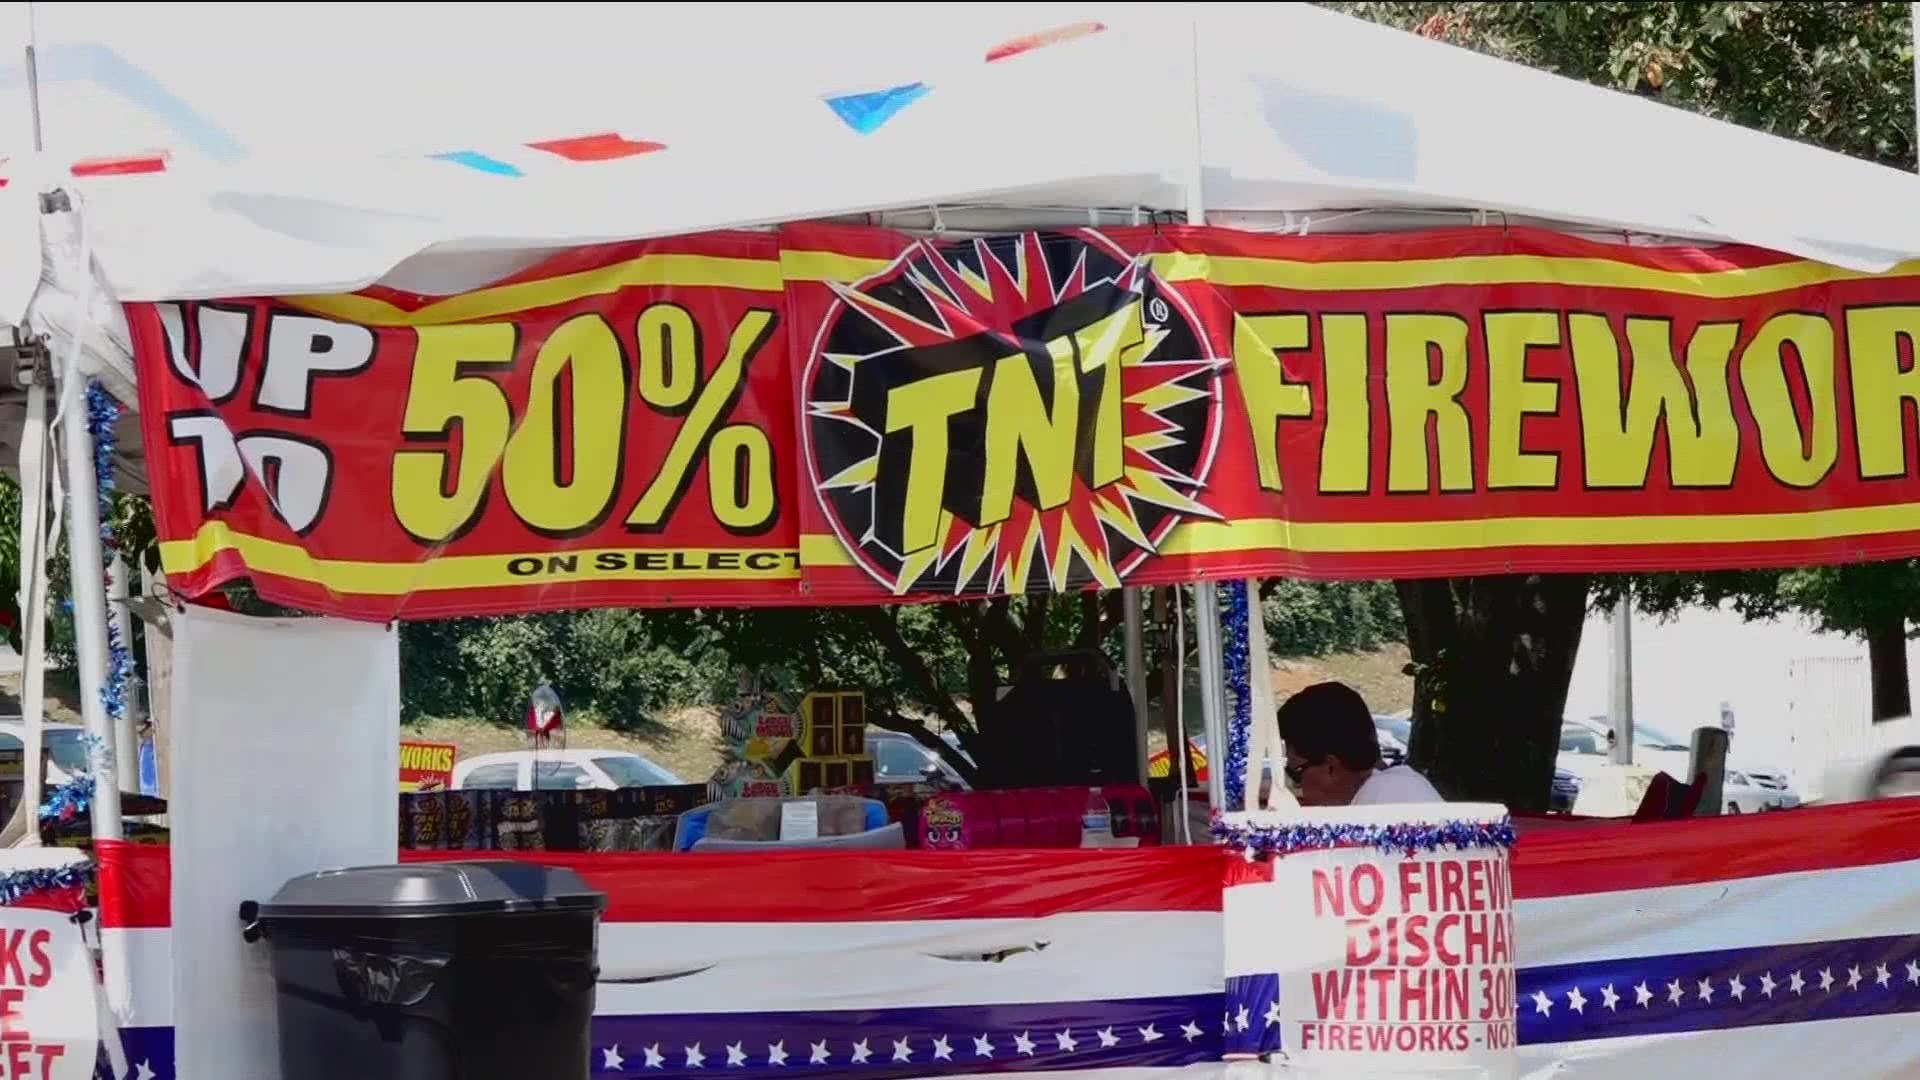 Ohio Gov. Mike DeWine signed a law allowing fireworks on certain holidays in the state, but city officials in Toledo have opted out.